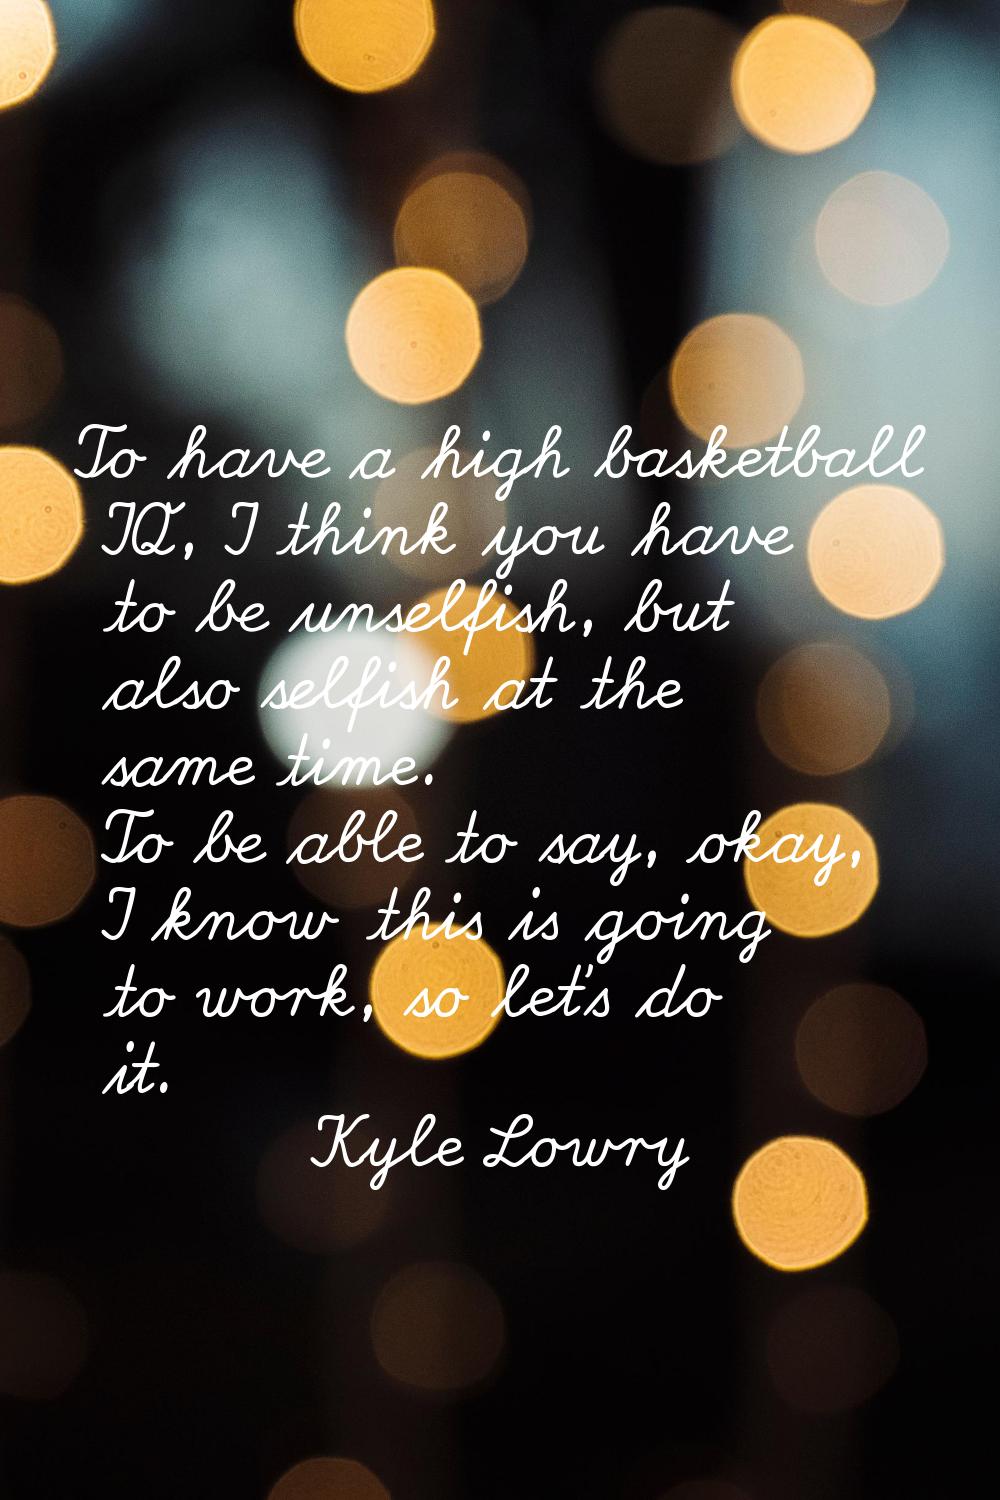 To have a high basketball IQ, I think you have to be unselfish, but also selfish at the same time. 